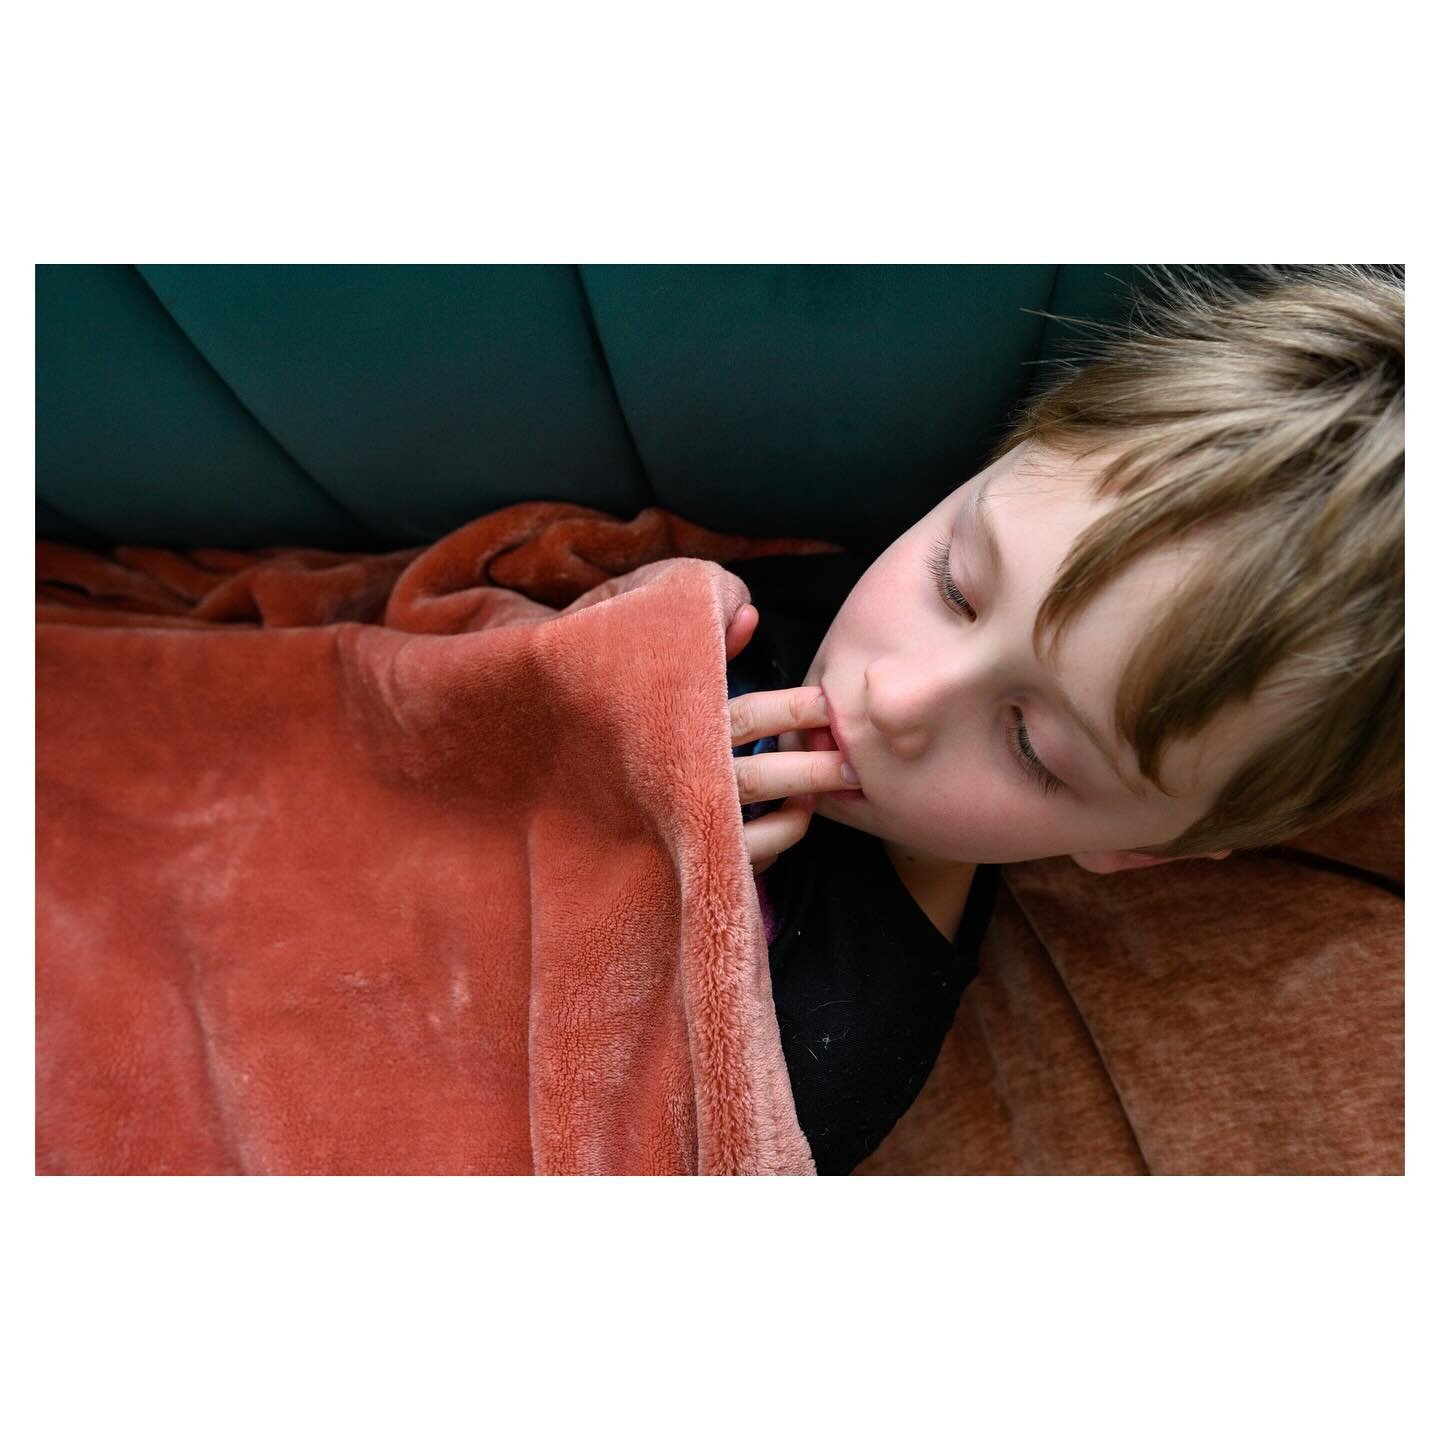 Sick day.

#madefordocumentary #michiganfamilyphotographer #grandrapidsfamilyphotographer ⁠
#documentaryfamilyphotography #documentlife #lifeunscripted #storytelling #momentsoverposes⁠⁠ 
#thebeautifulreal #honestlyparents #unposedfamily #reallife #th